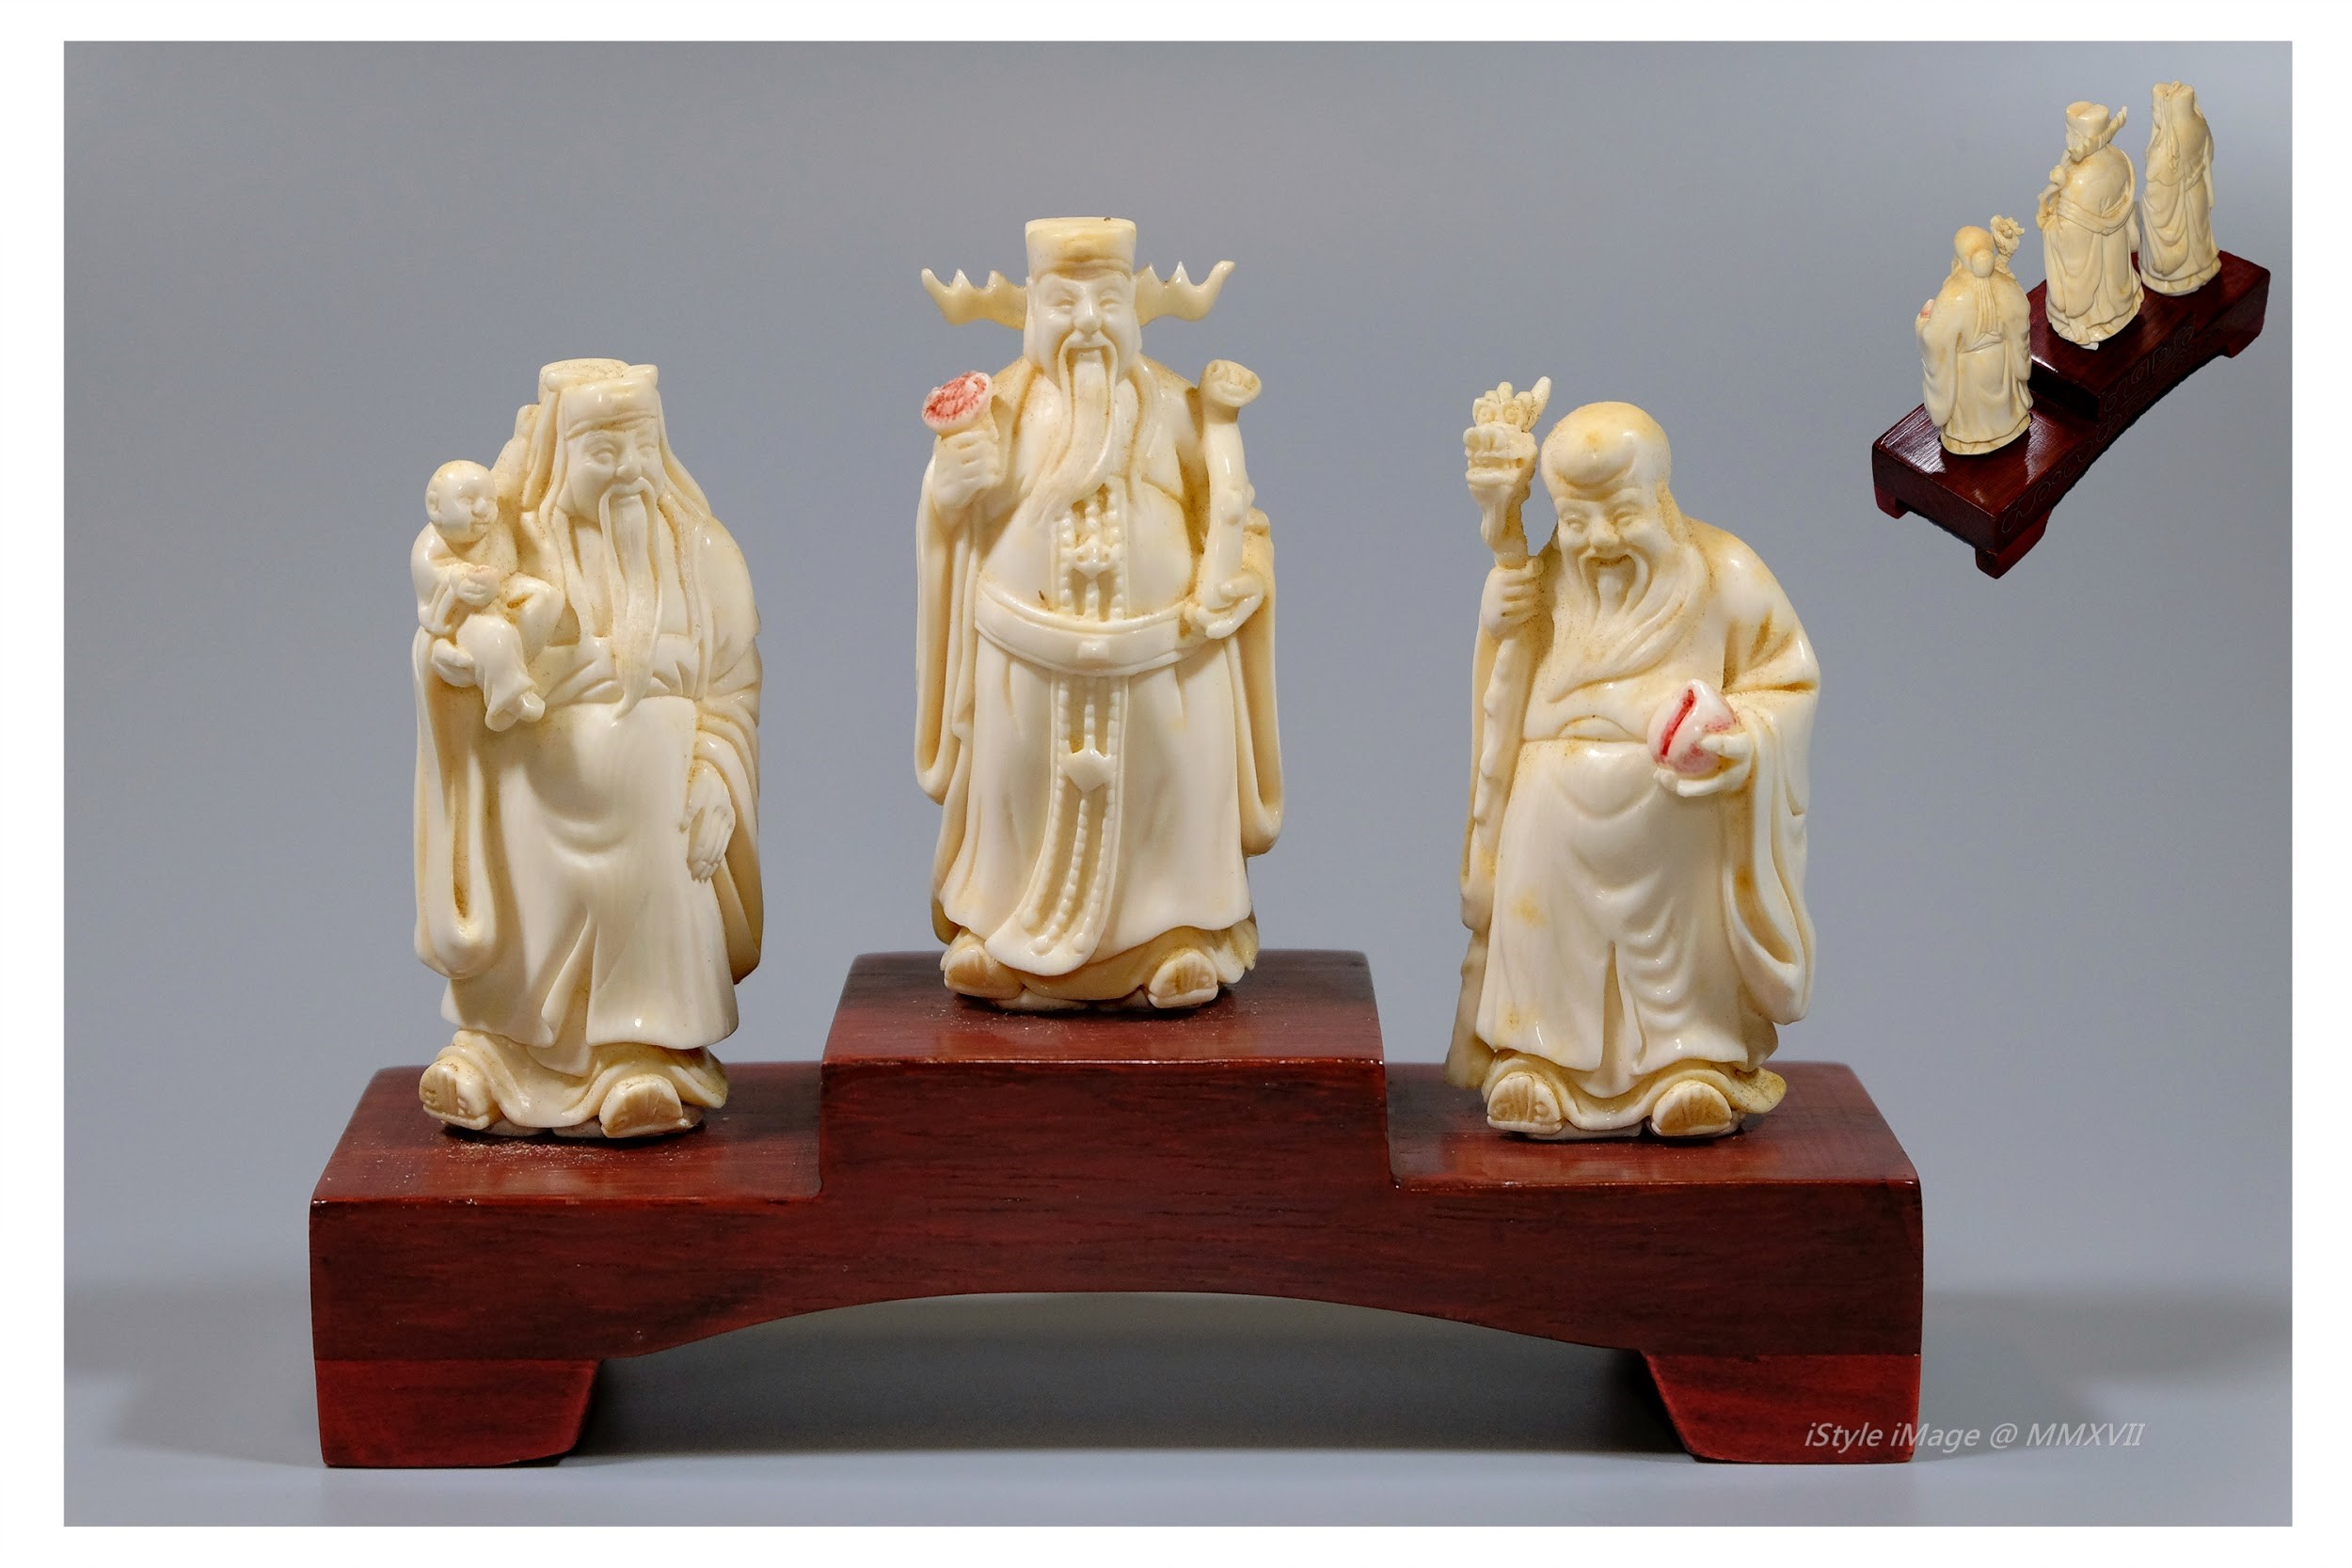 <br><h4>Lot 42 : Fu Lu Shou ivory figure</h4>
				  This very fine and nearly perfect ivory, very well craved Fu Lu Shou figure, they are symbolic of Good Prosperity, Happy and Longevity, commonly as a gift to someone represent a good luck, happiness and longevity wishes. Fu on behalf of the official, Lu represent good prosperity, his hand holding a child for family, Shou holding his attributes of gnarled dragon staff and peach, symbolic of Happy and Longevity. This is a very good collector lot.  
					<br>Measurements (H) high 7.2 CM, (T) thick 2.2 CM, (W)width 3.3 CM<br><br><br>這完美而雕工又好的象牙福祿壽是收藏佳品: 民間吉祥如意祝壽象徵。福為中國古代官員造型，峨冠博帶；祿代表官祿及送子，手抱孩兒；壽代表高壽，一手持龍杖，一手持壽桃。<br>尺寸(H)高 7.2 厘米, (T)深2.2 厘米 ,  (W)濶3.3 厘米